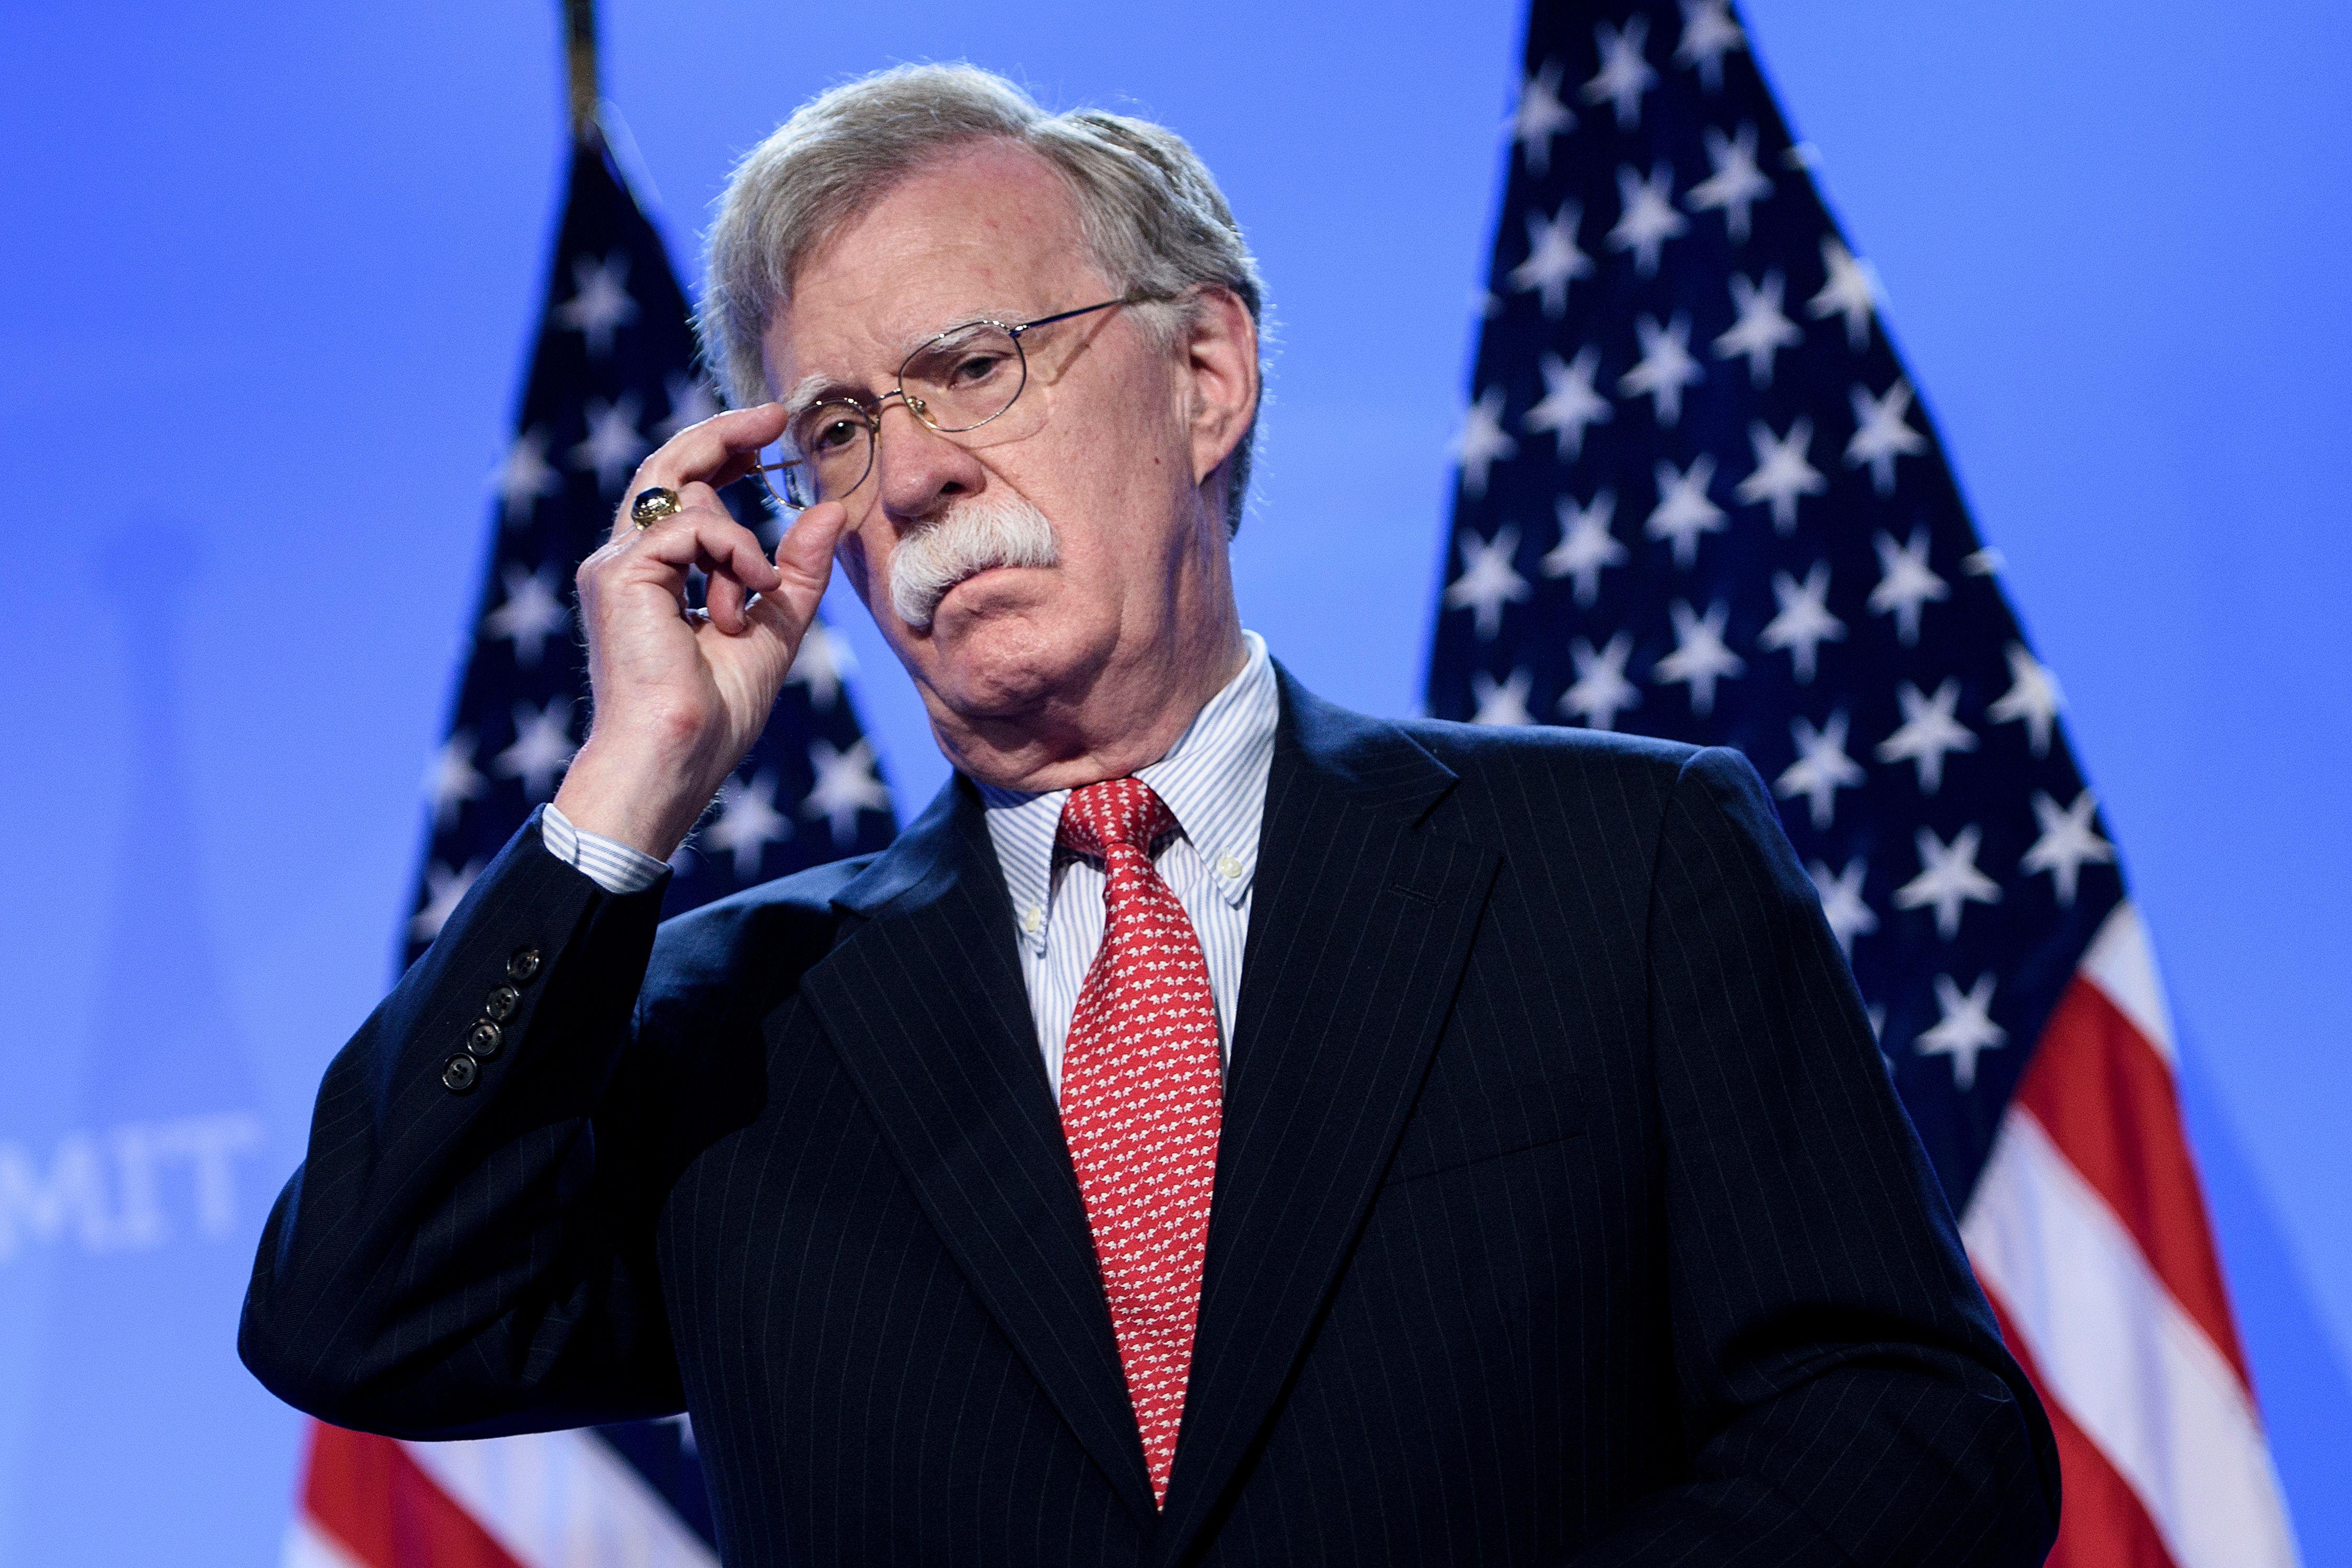 John Bolton adjusts his glasses in front of two American flags.